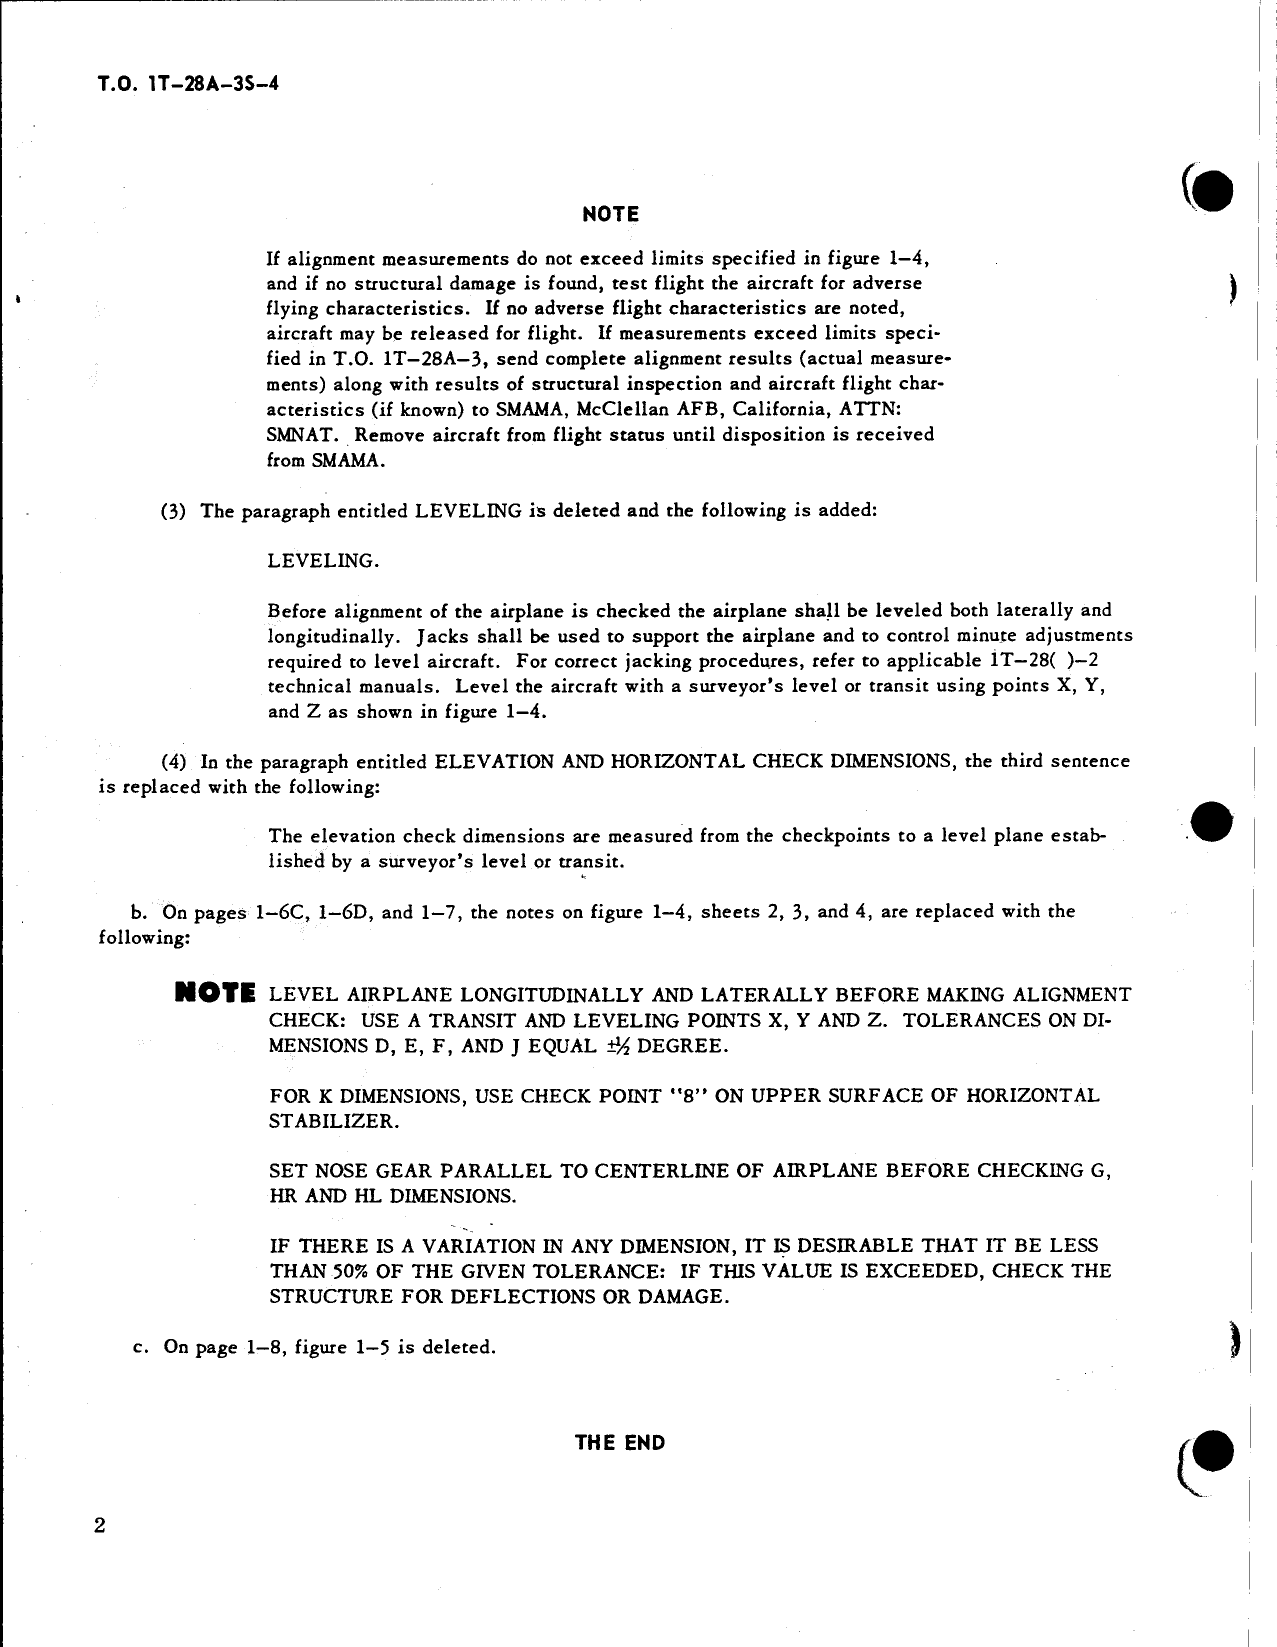 Sample page  8 from AirCorps Library document: Safety Supplement Structural Repair Tech Manual, T-28A T-28B T-28C T-28D